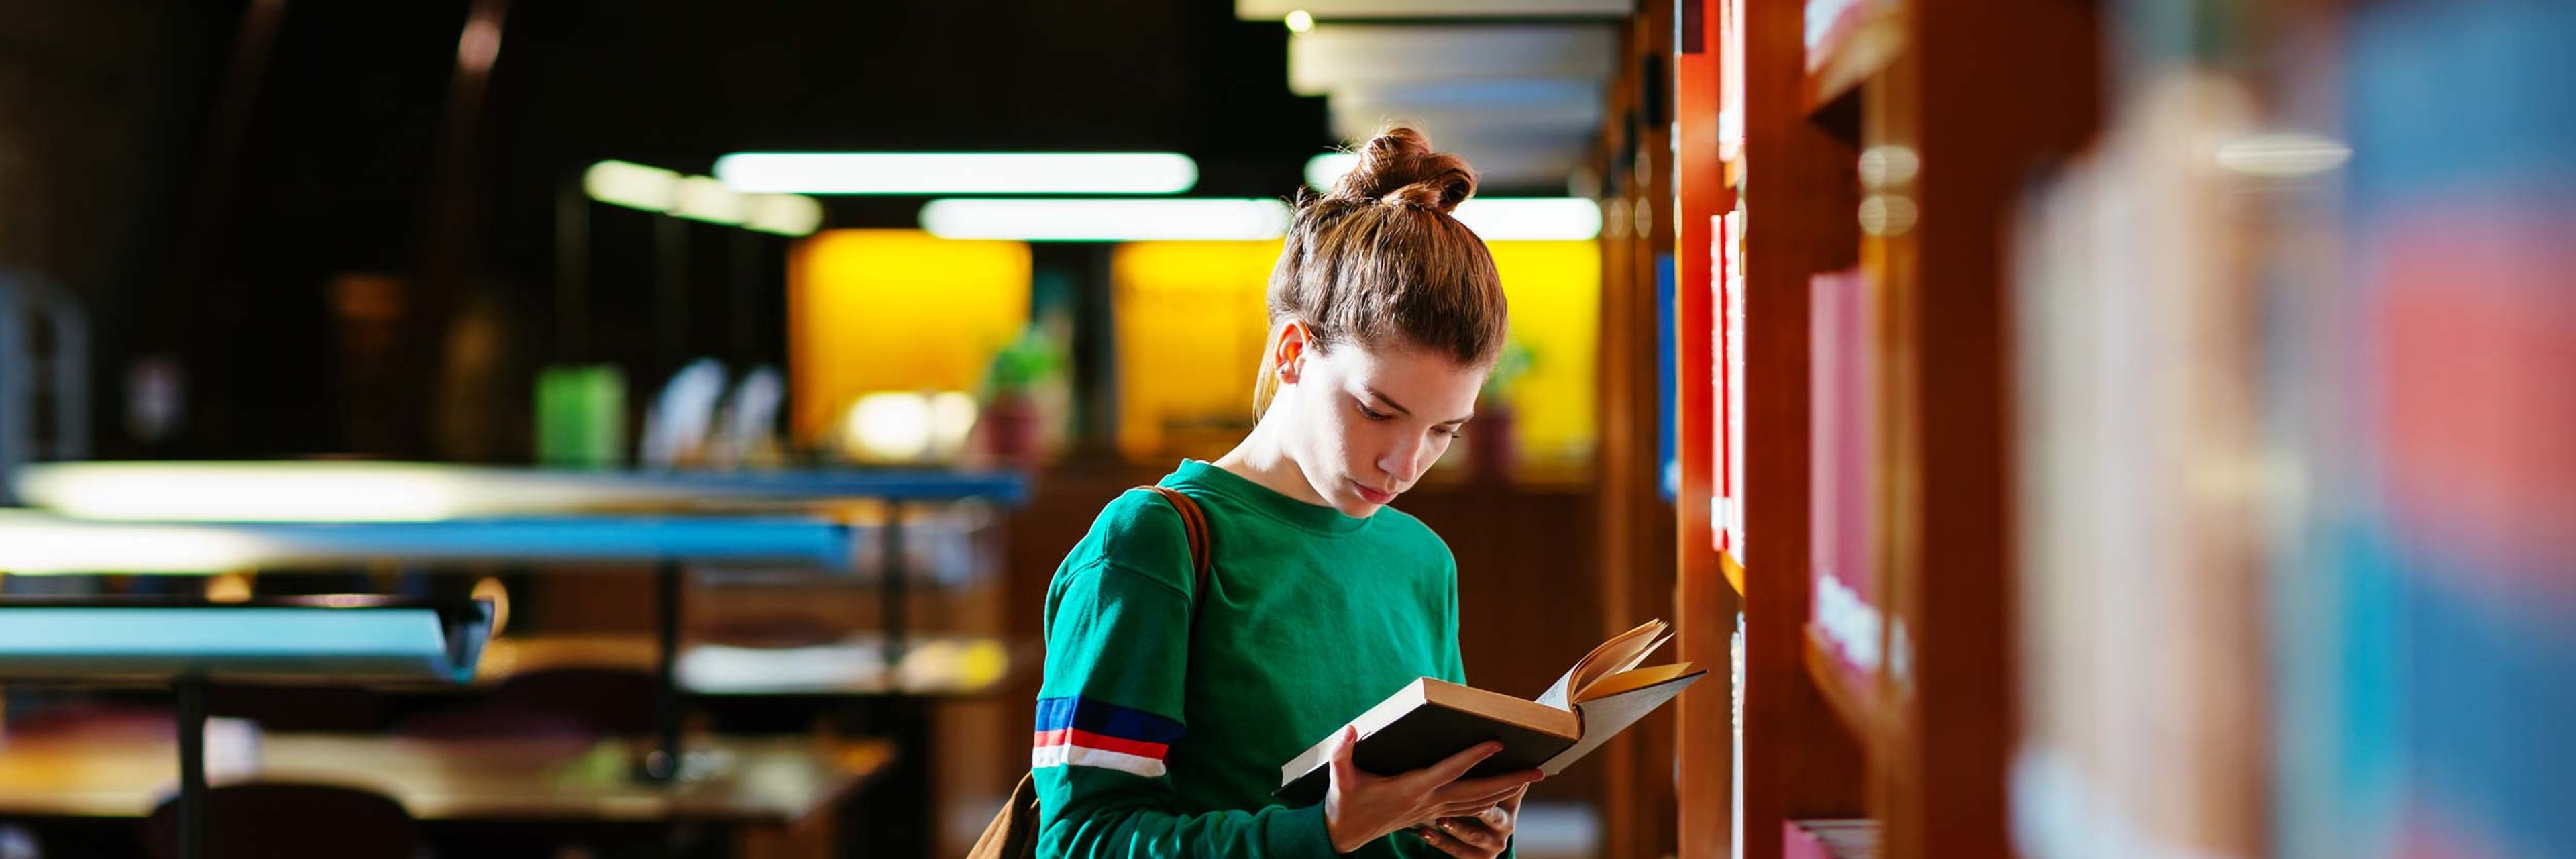 A young woman standing reading a book inside a library.